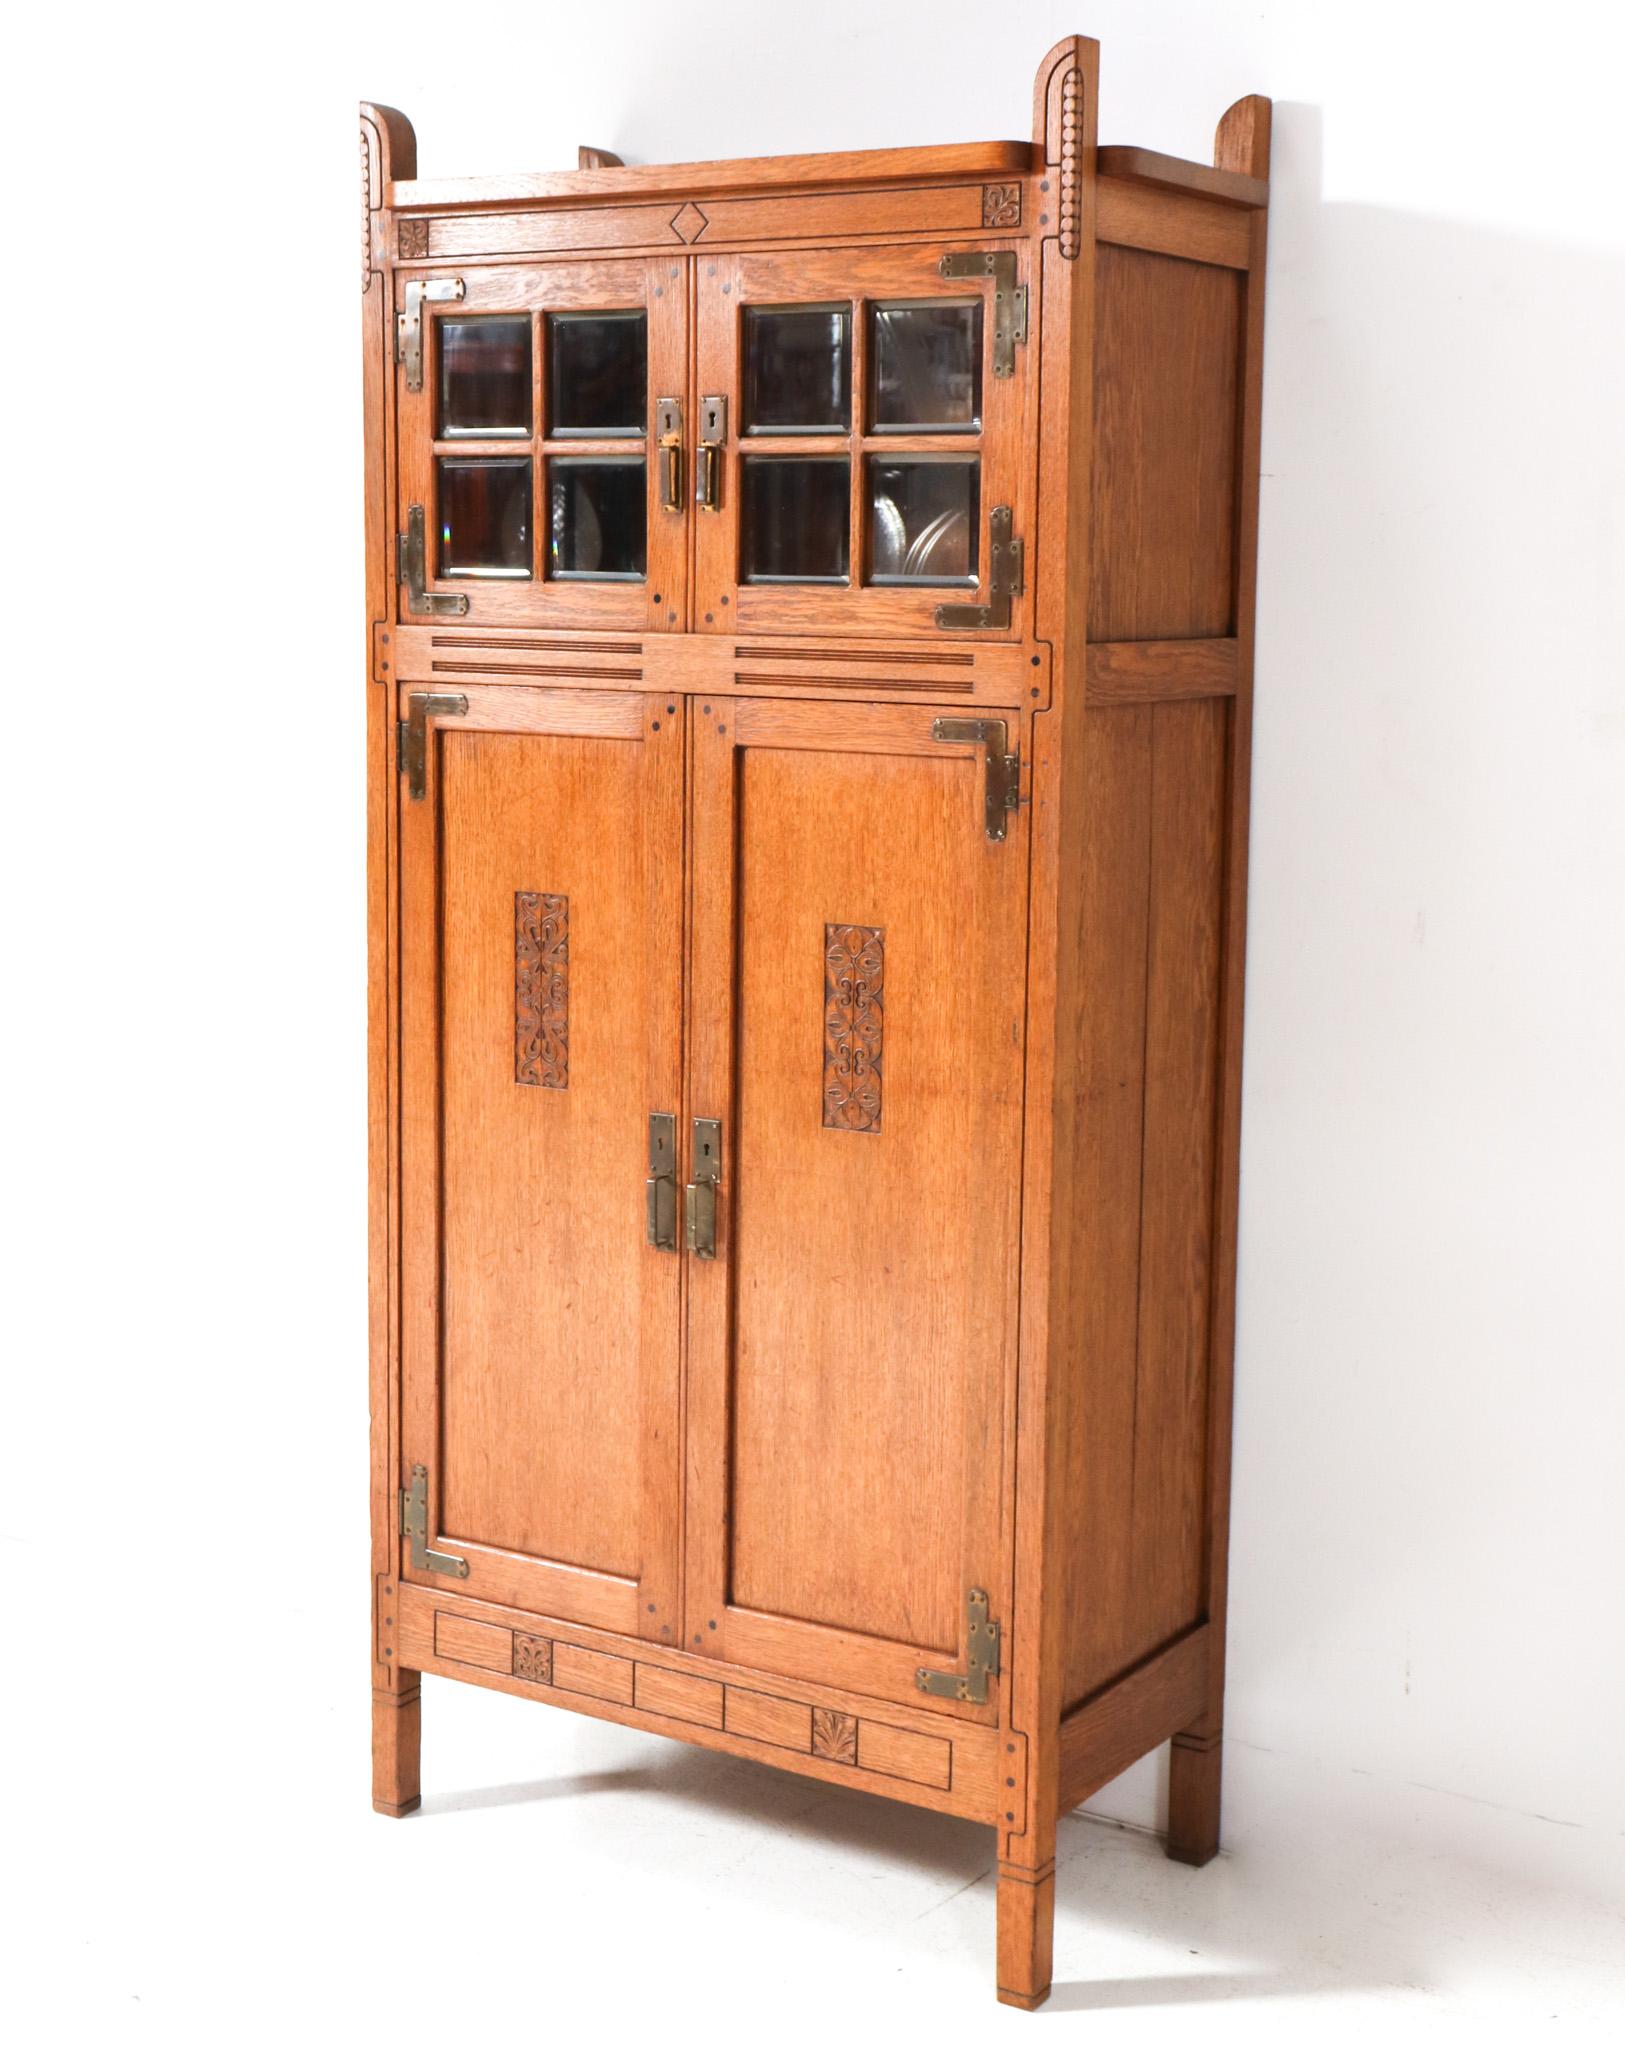 Magnificent and ultra rare Arts & Crafts armoire.
Design by Willem Penaat for Fa. Haag & Zn Amsterdam.
Striking Dutch design from 1897.
Solid oak frame with original patinated brass handles on the four doors.
The eight patinated brass hinges are